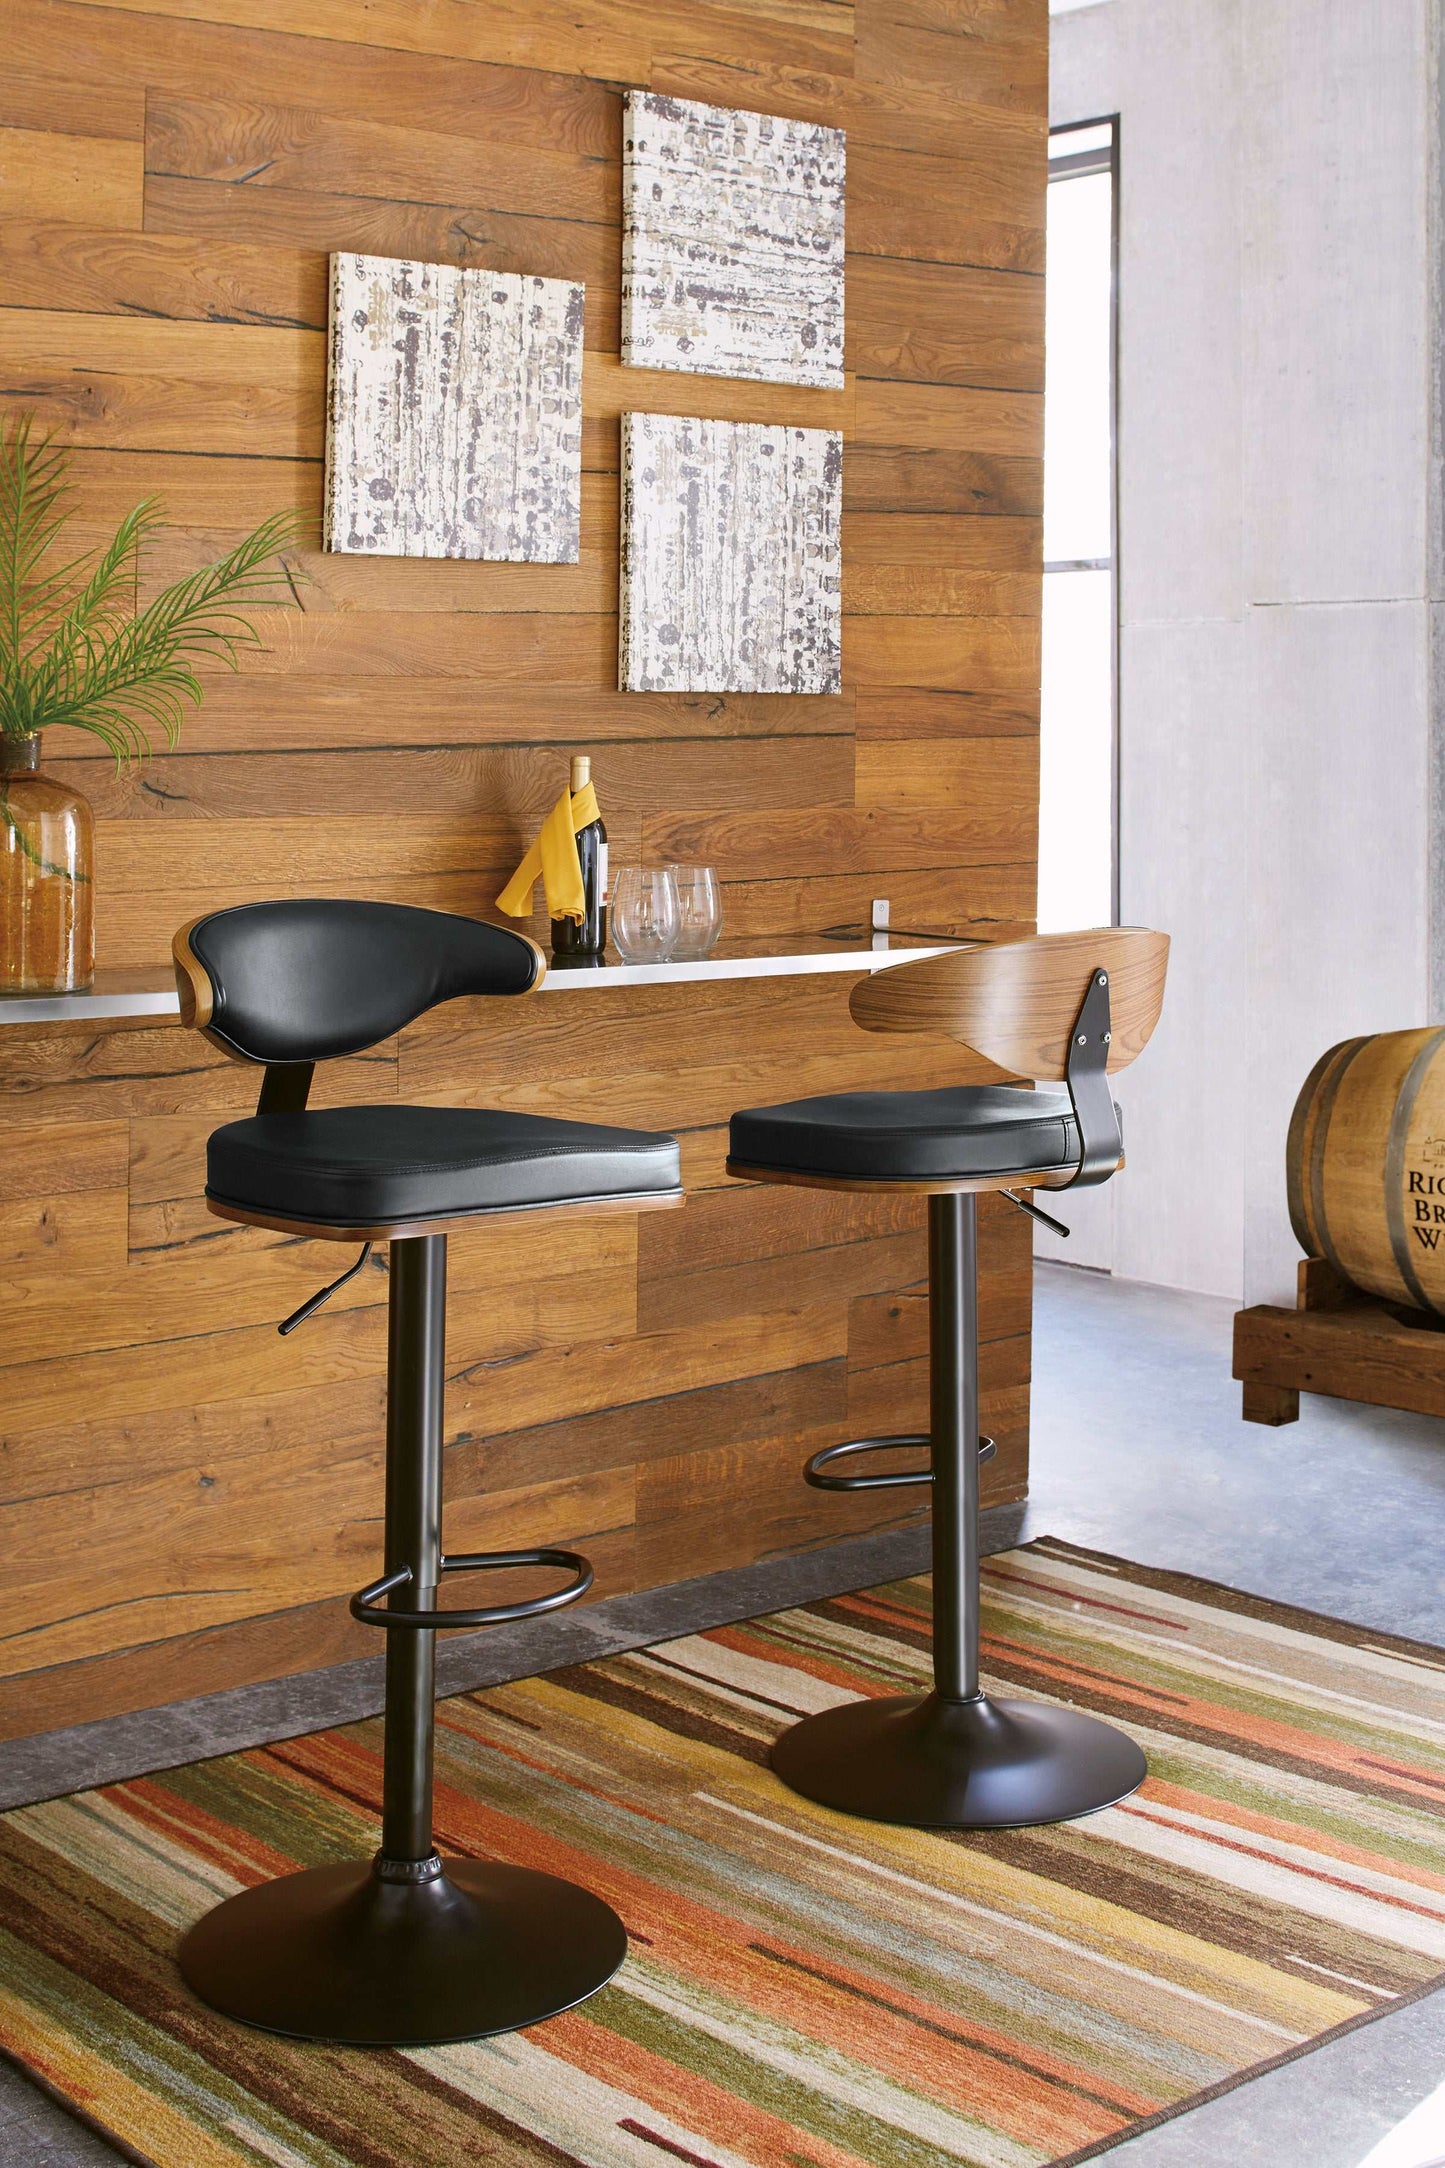 Bellatier Faux Leather Adjustable Height Bar Stools